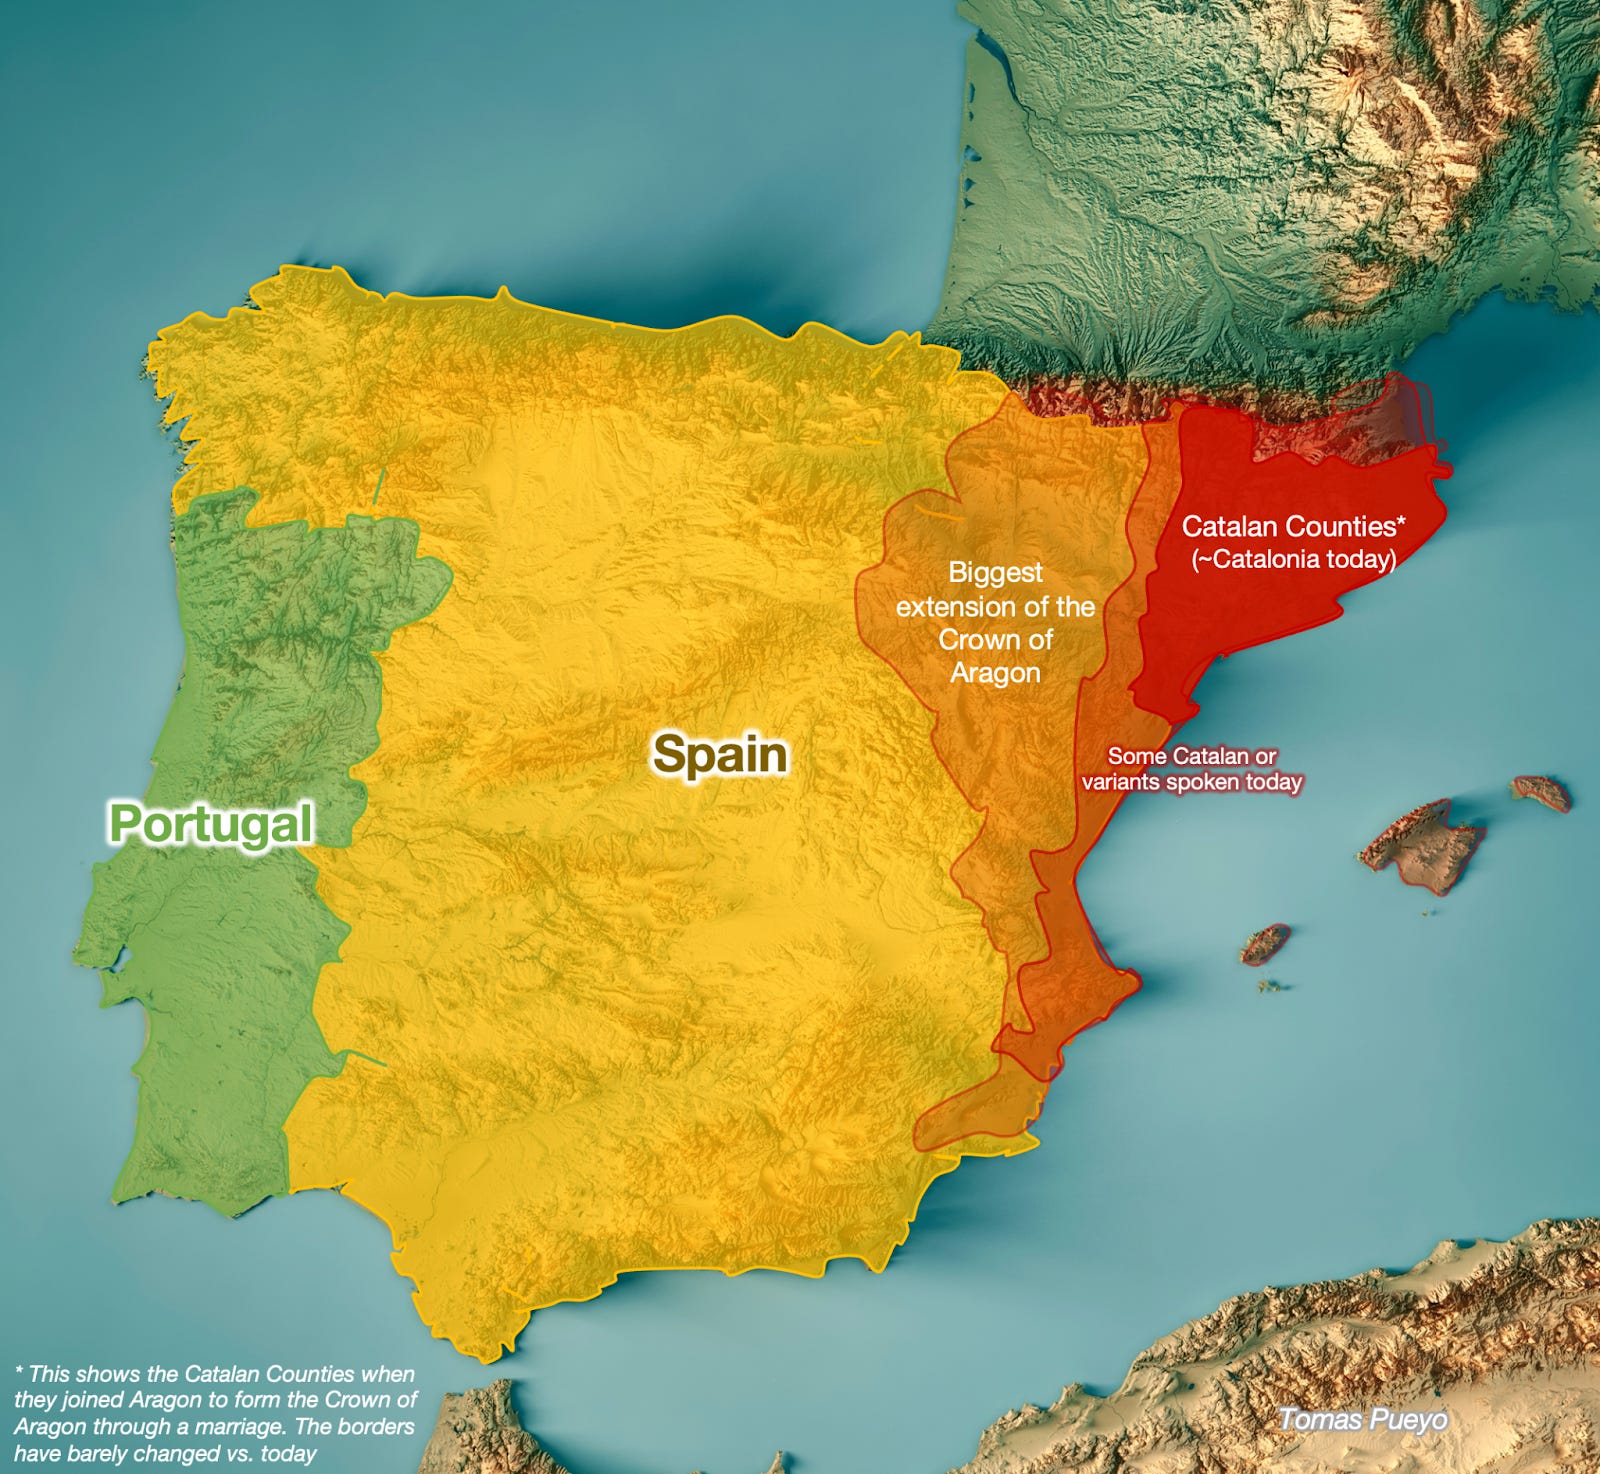 Why Catalonia Is Part Of Spain But Portugal Is Not?